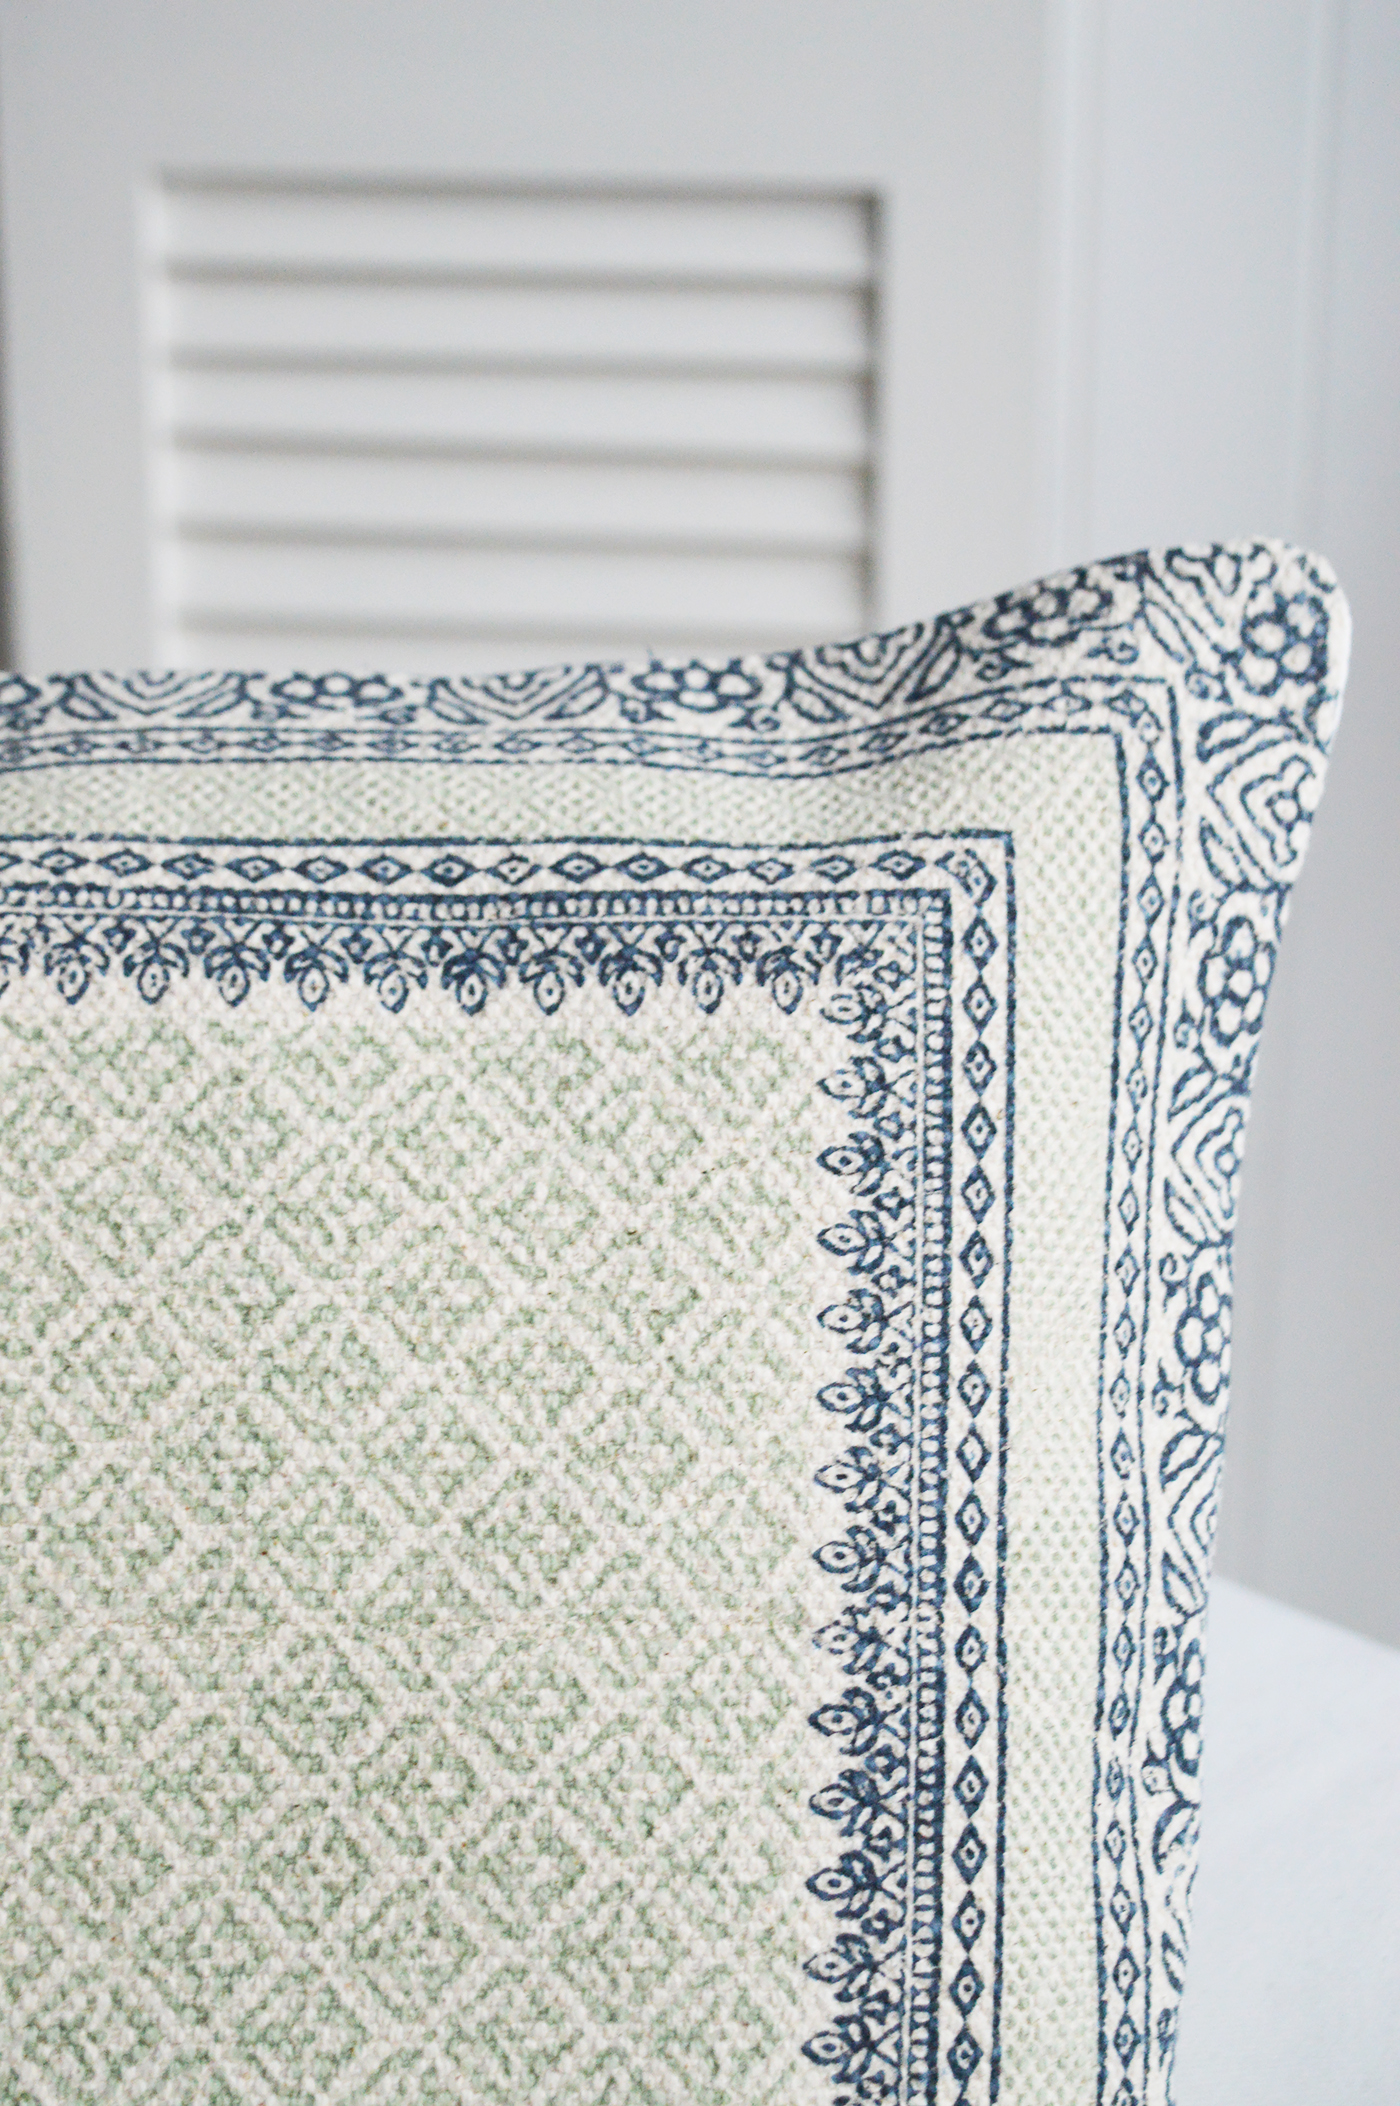 Quincy cushion cover in french grey and navy for New England interiors and furniture in coastal and country homes